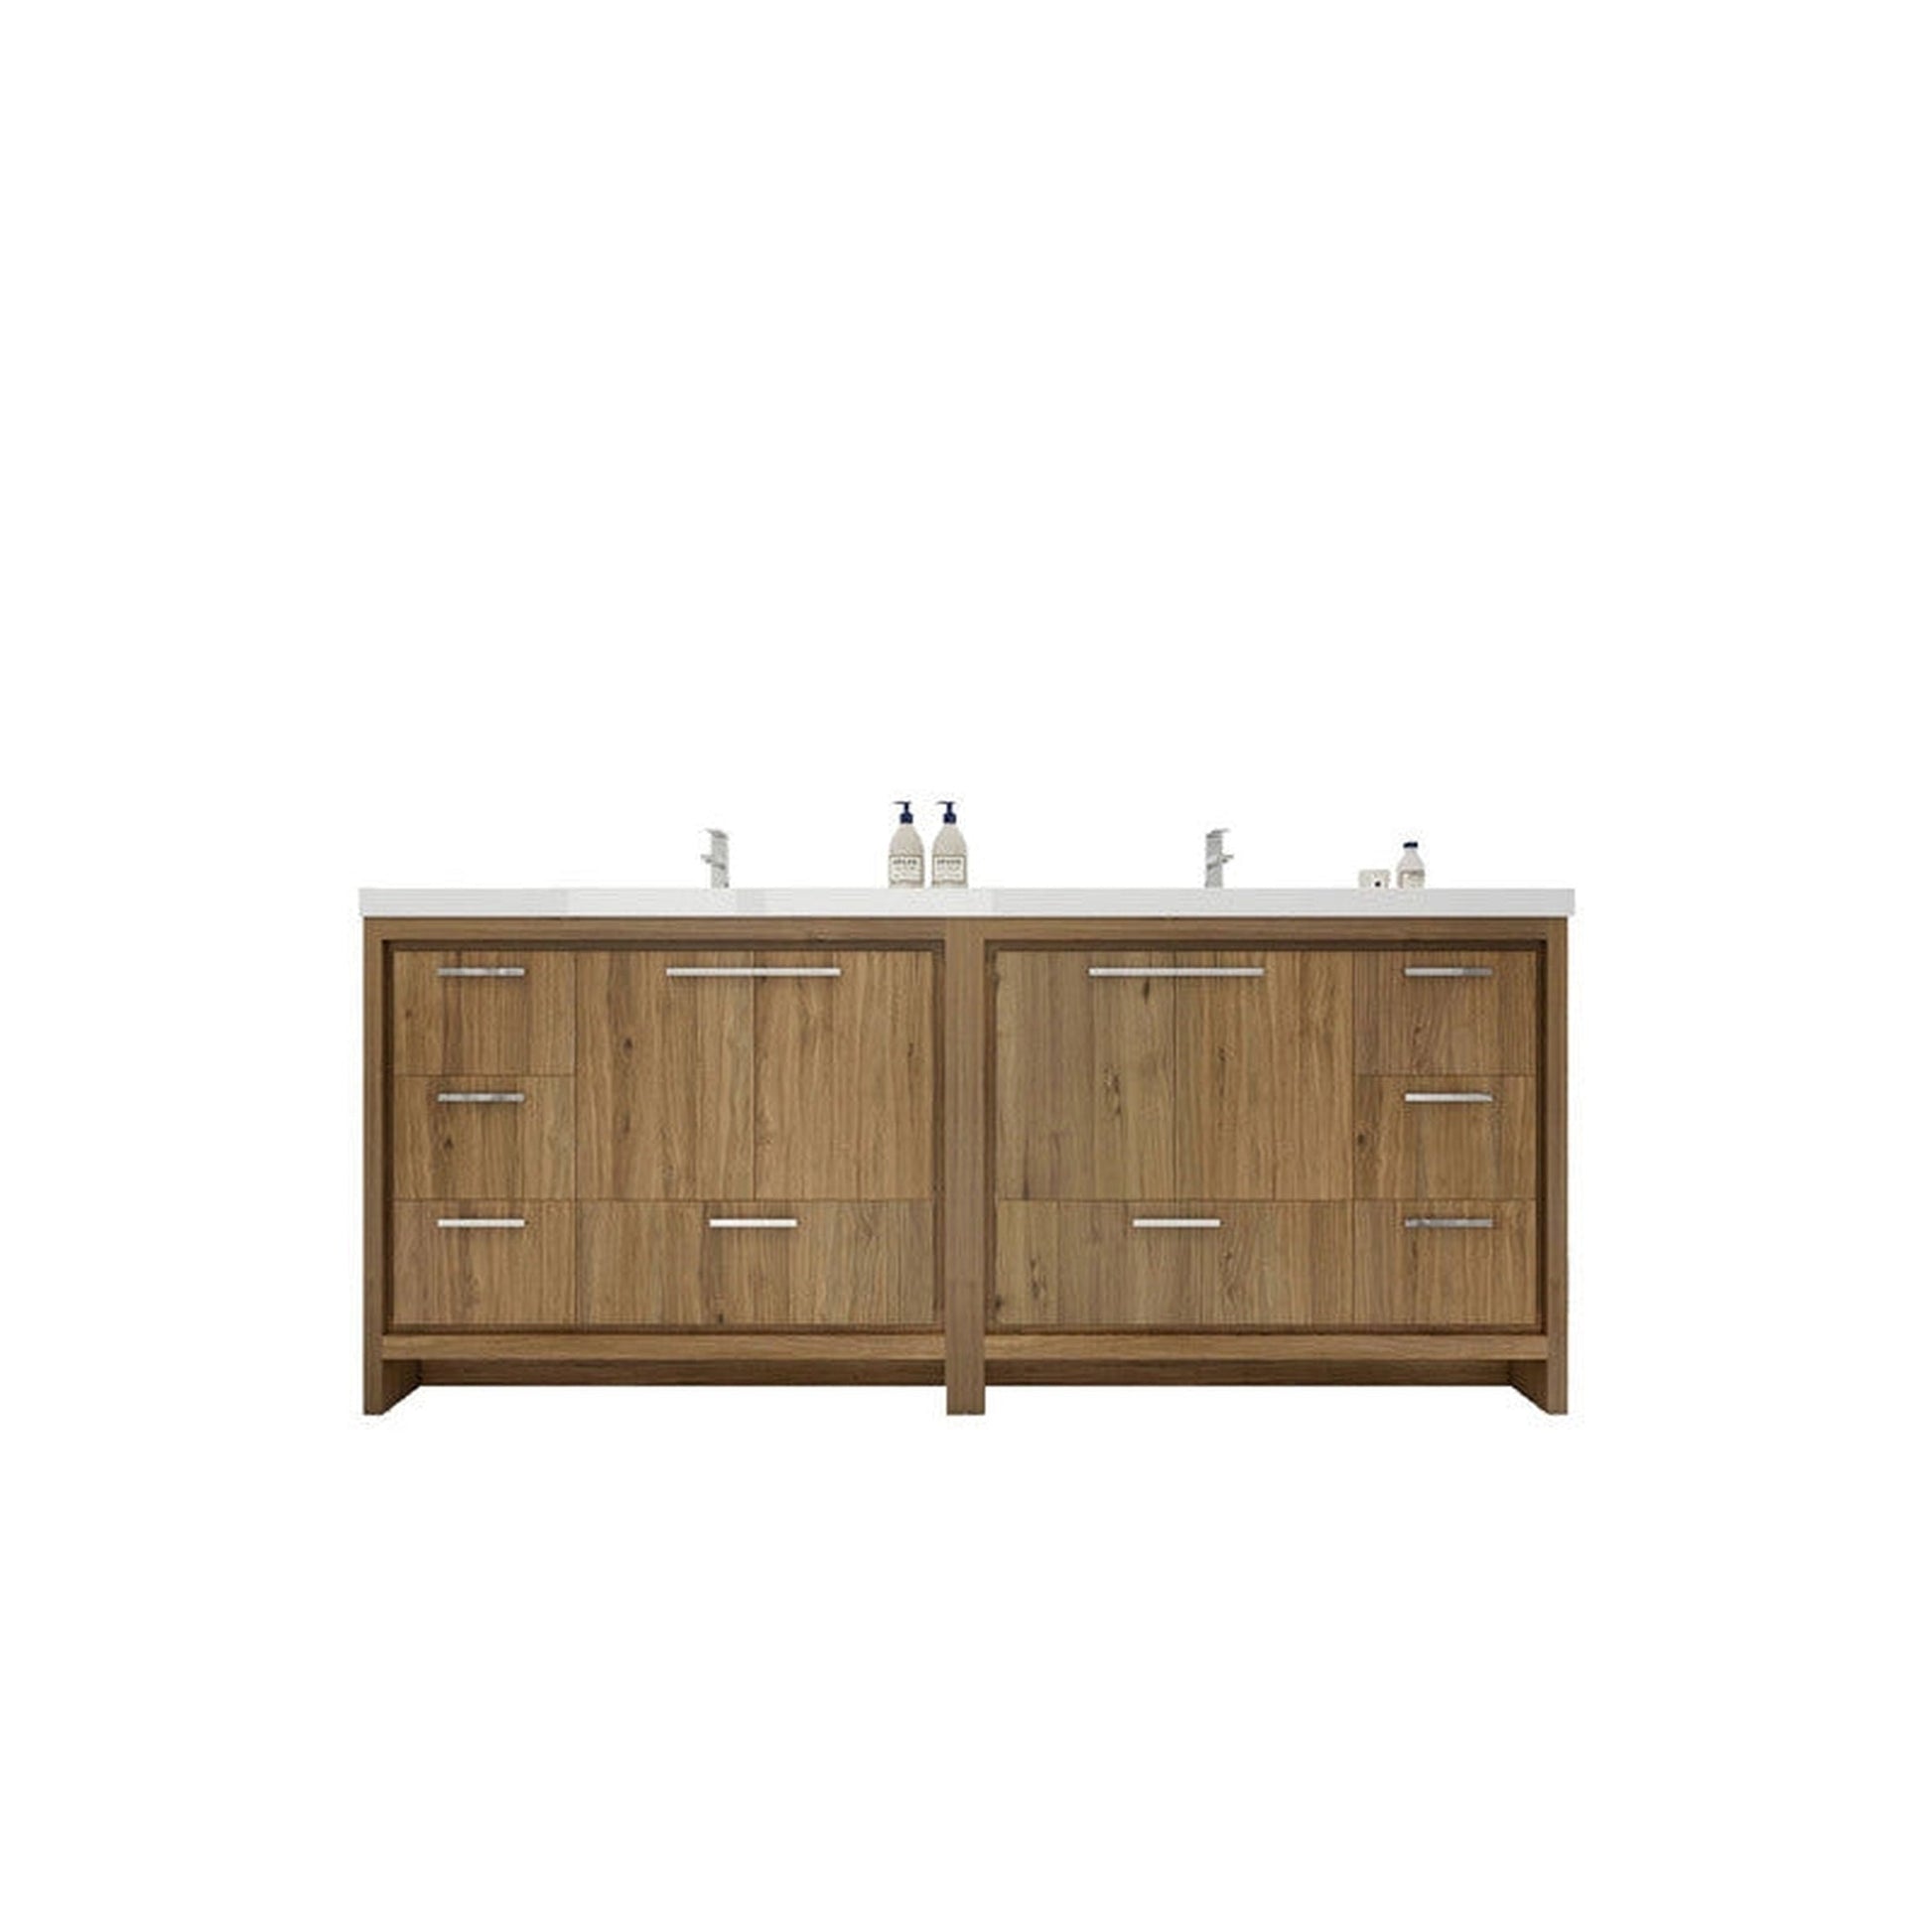 Moreno Bath Dolce 84" Natural Oak Freestanding Vanity With Double Reinforced White Acrylic Sinks